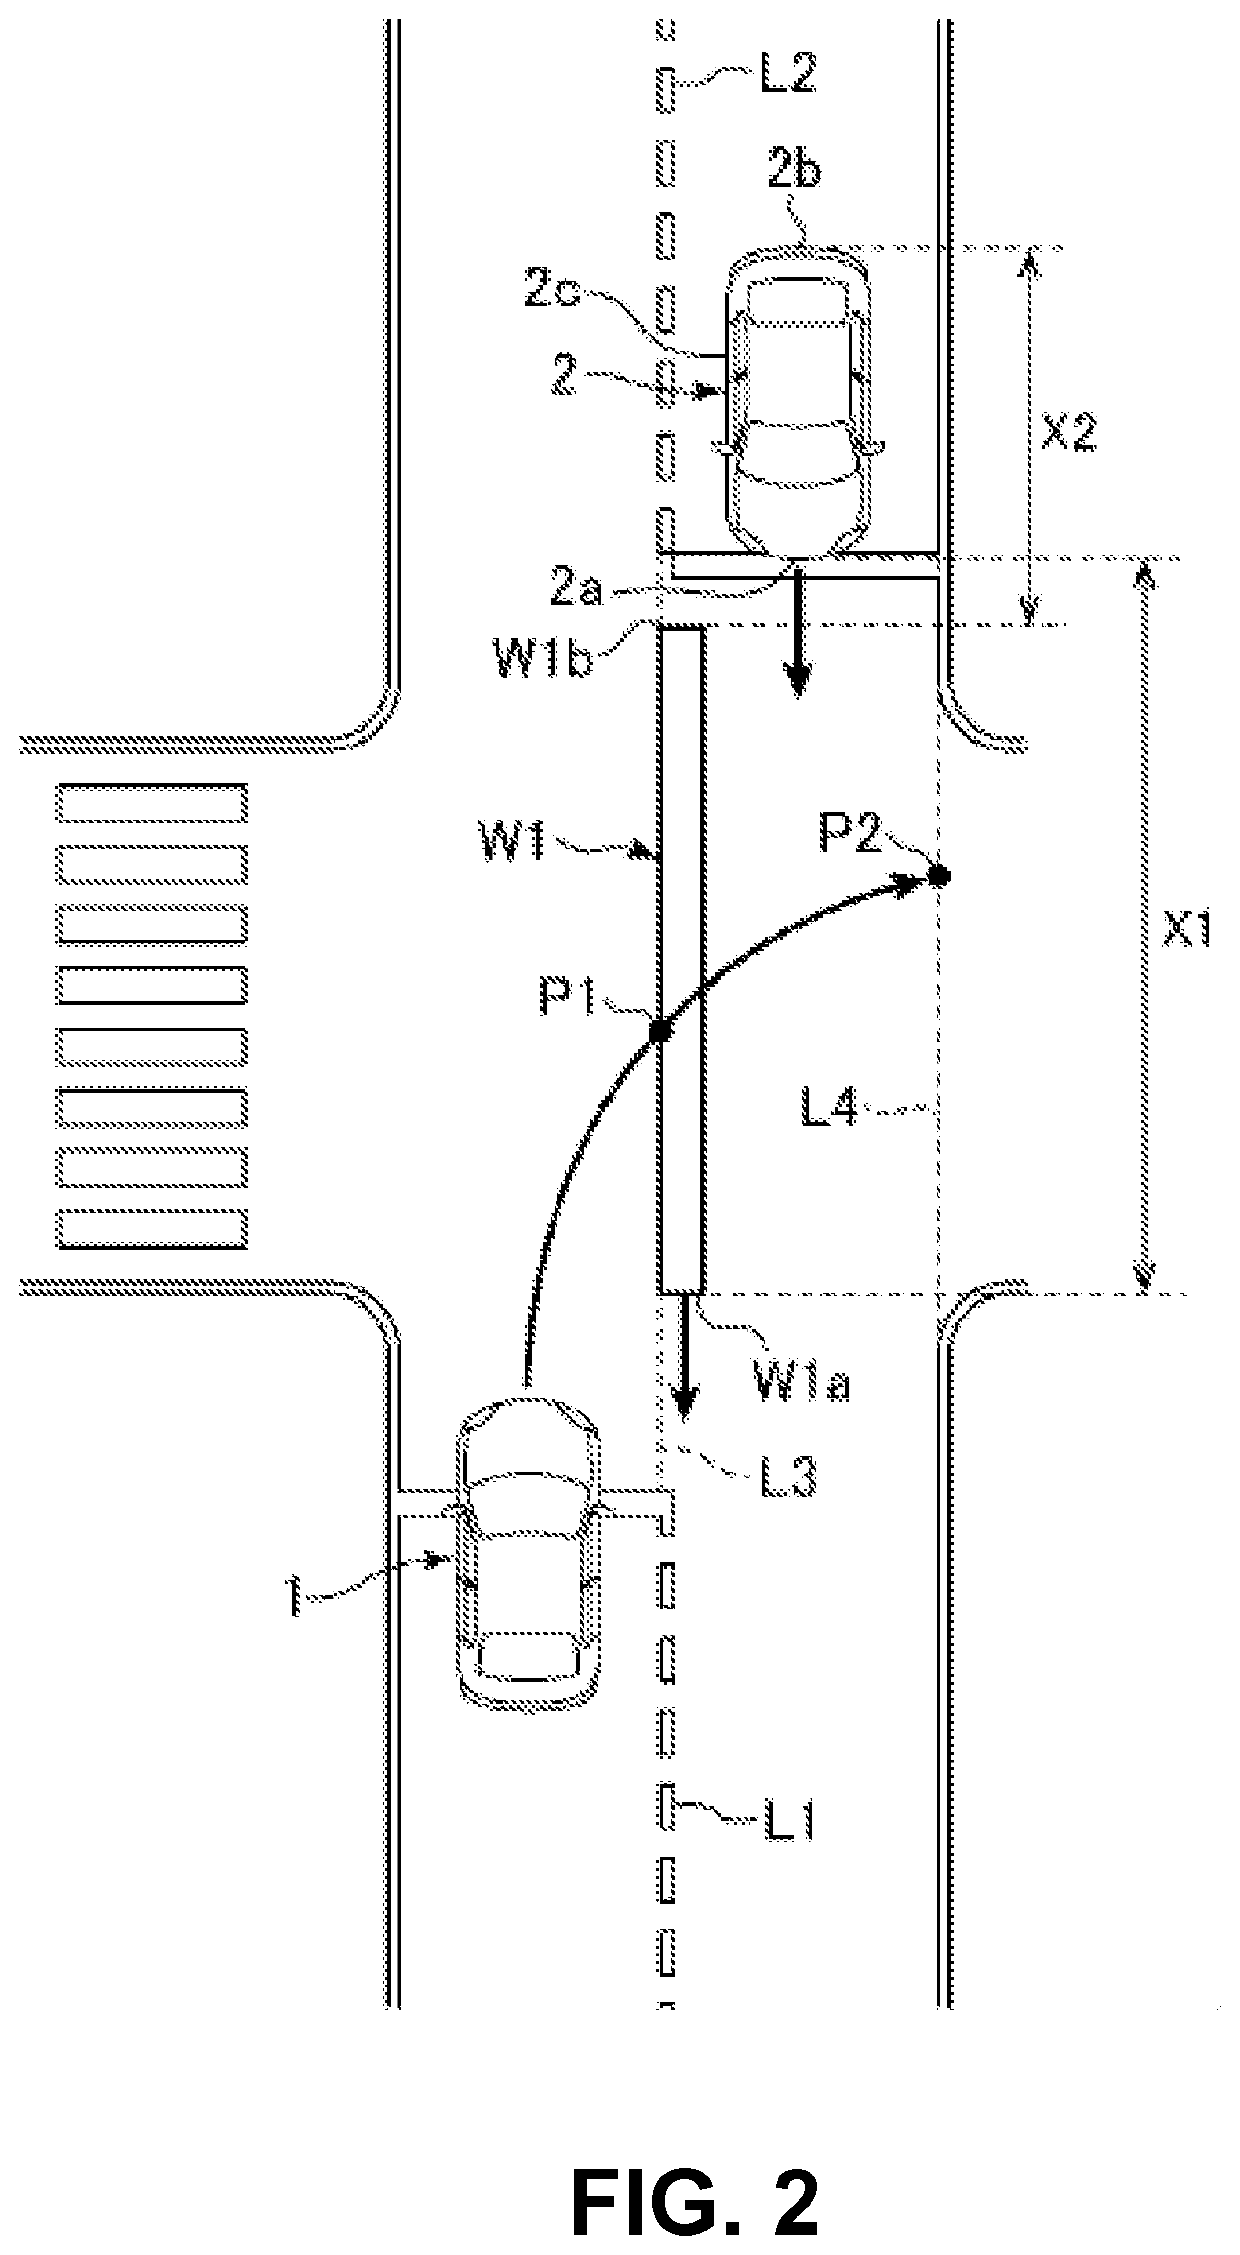 Vehicle control device, method and computer program product